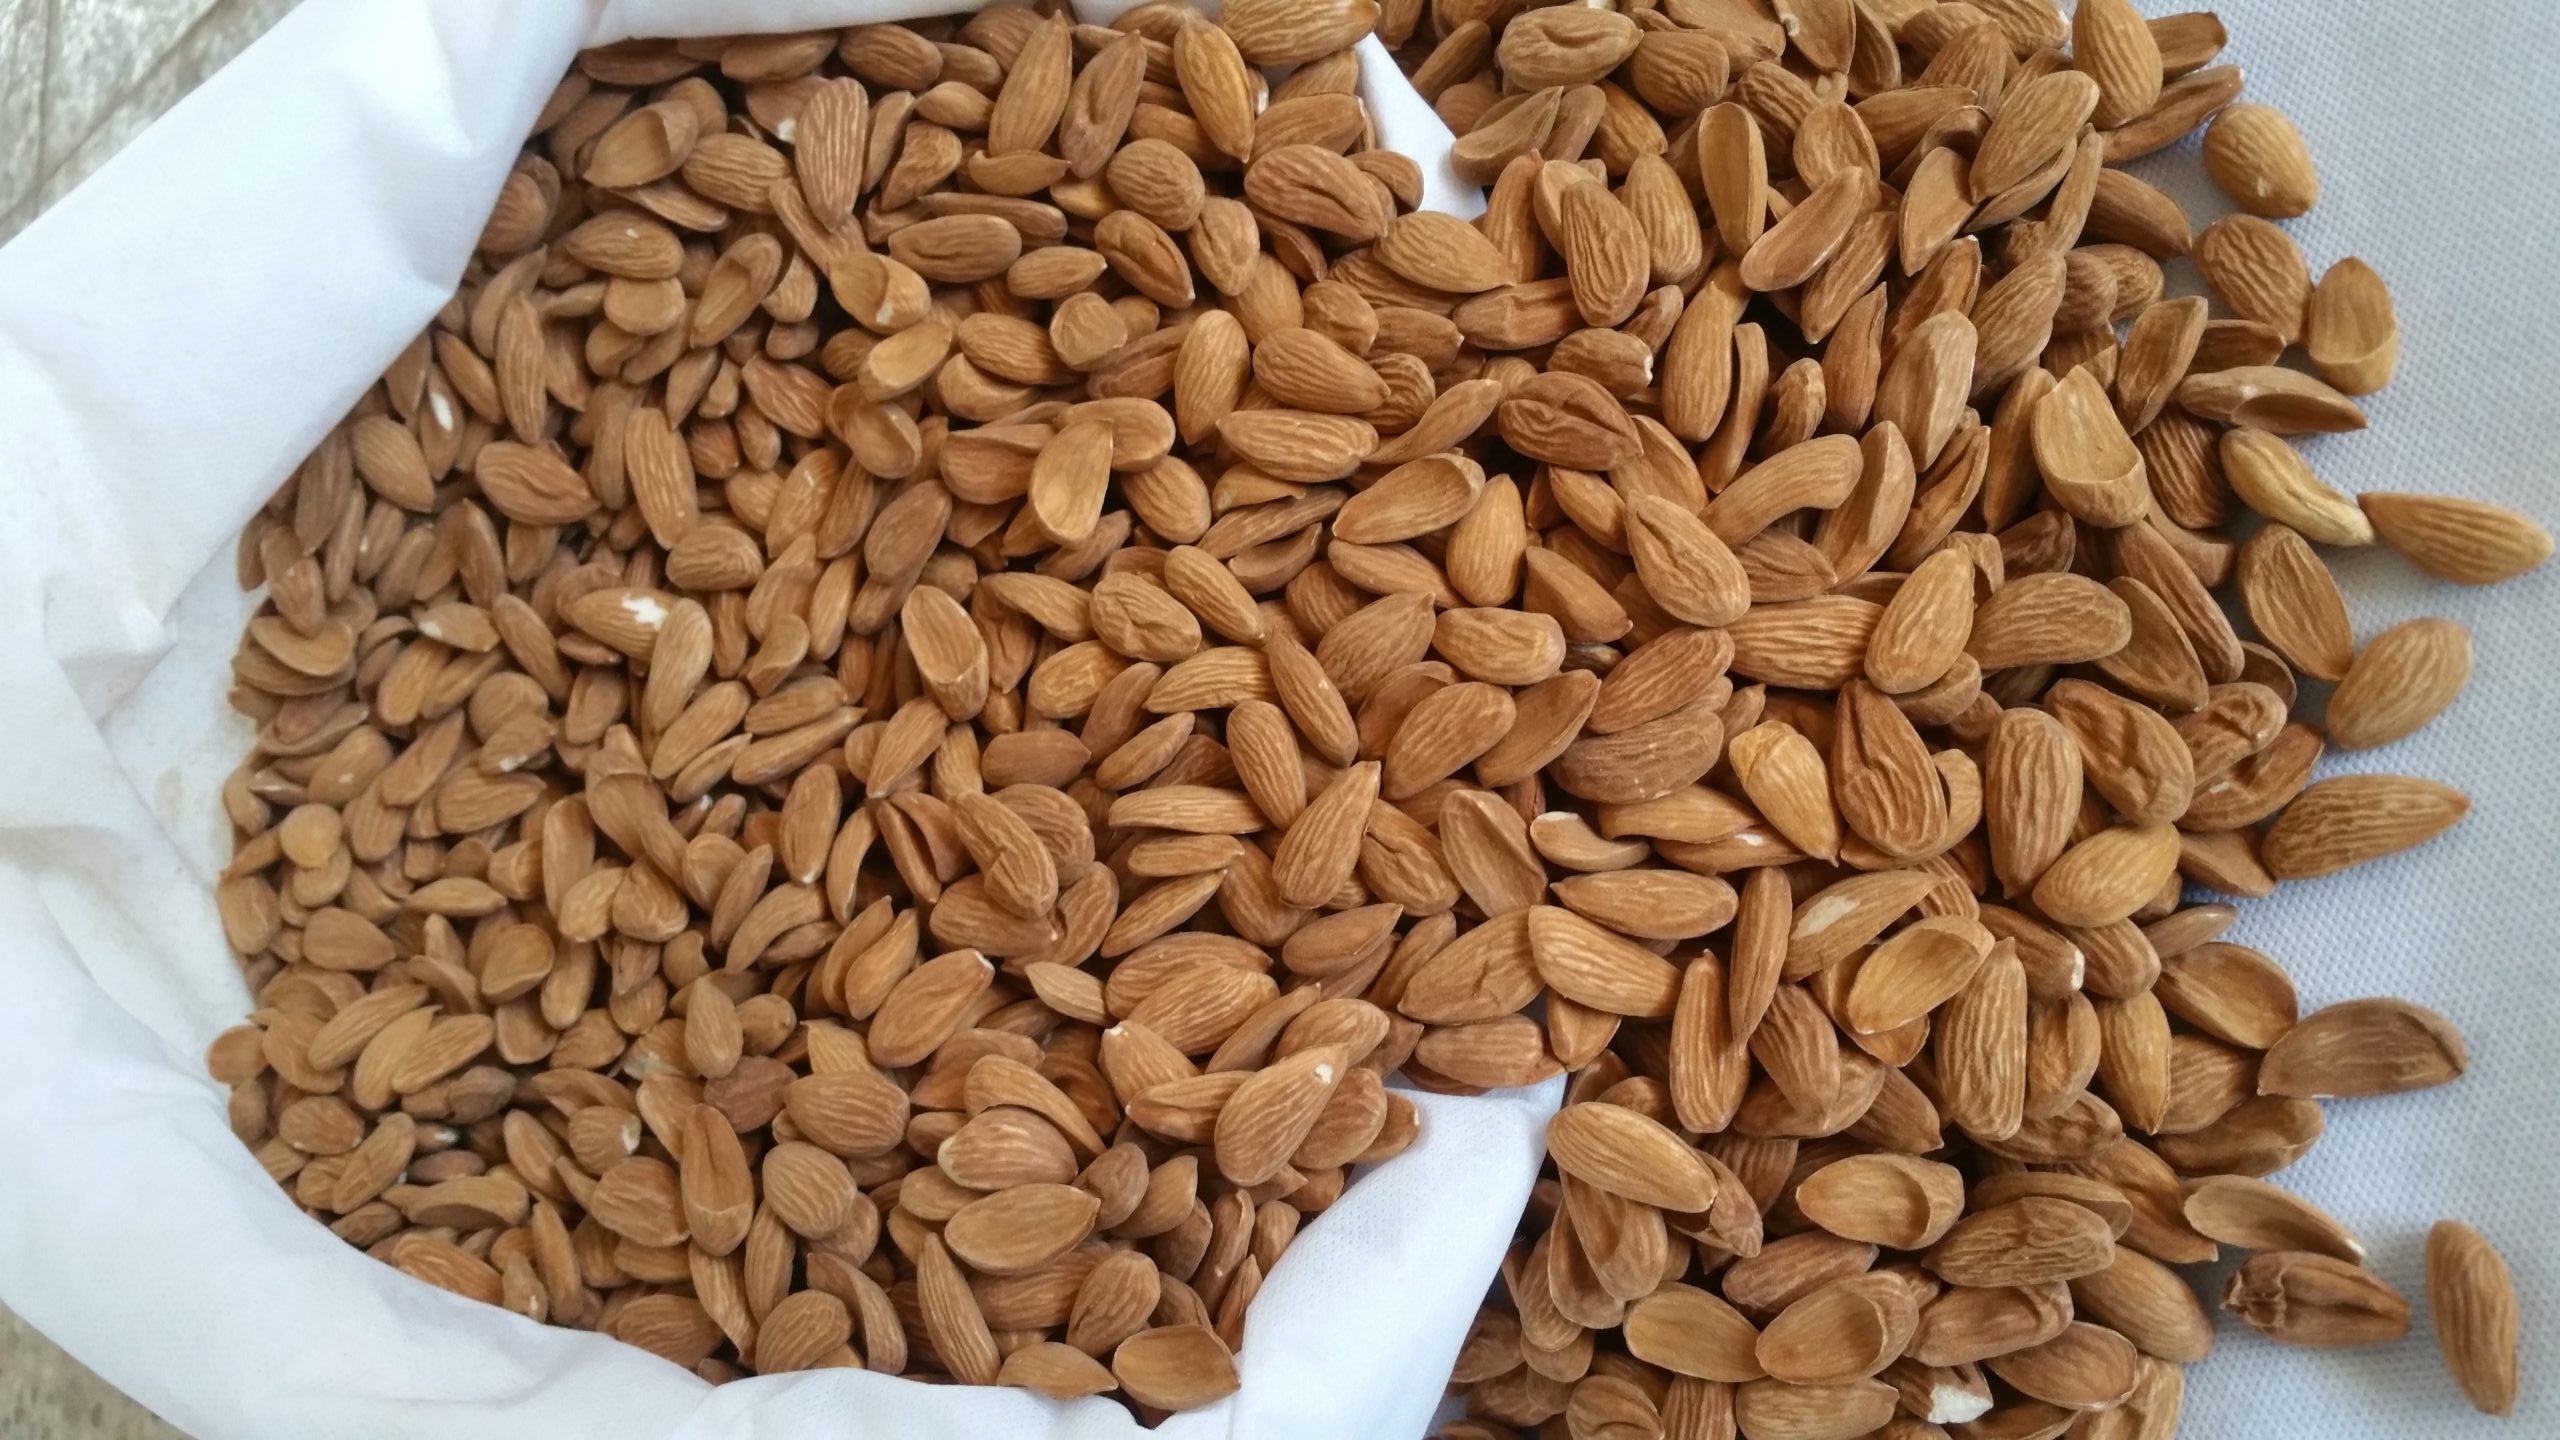 The Best Mamra Almonds:The Best Manufacturer of Mamra Almonds in Saman‚ Iran_ Nutex Company